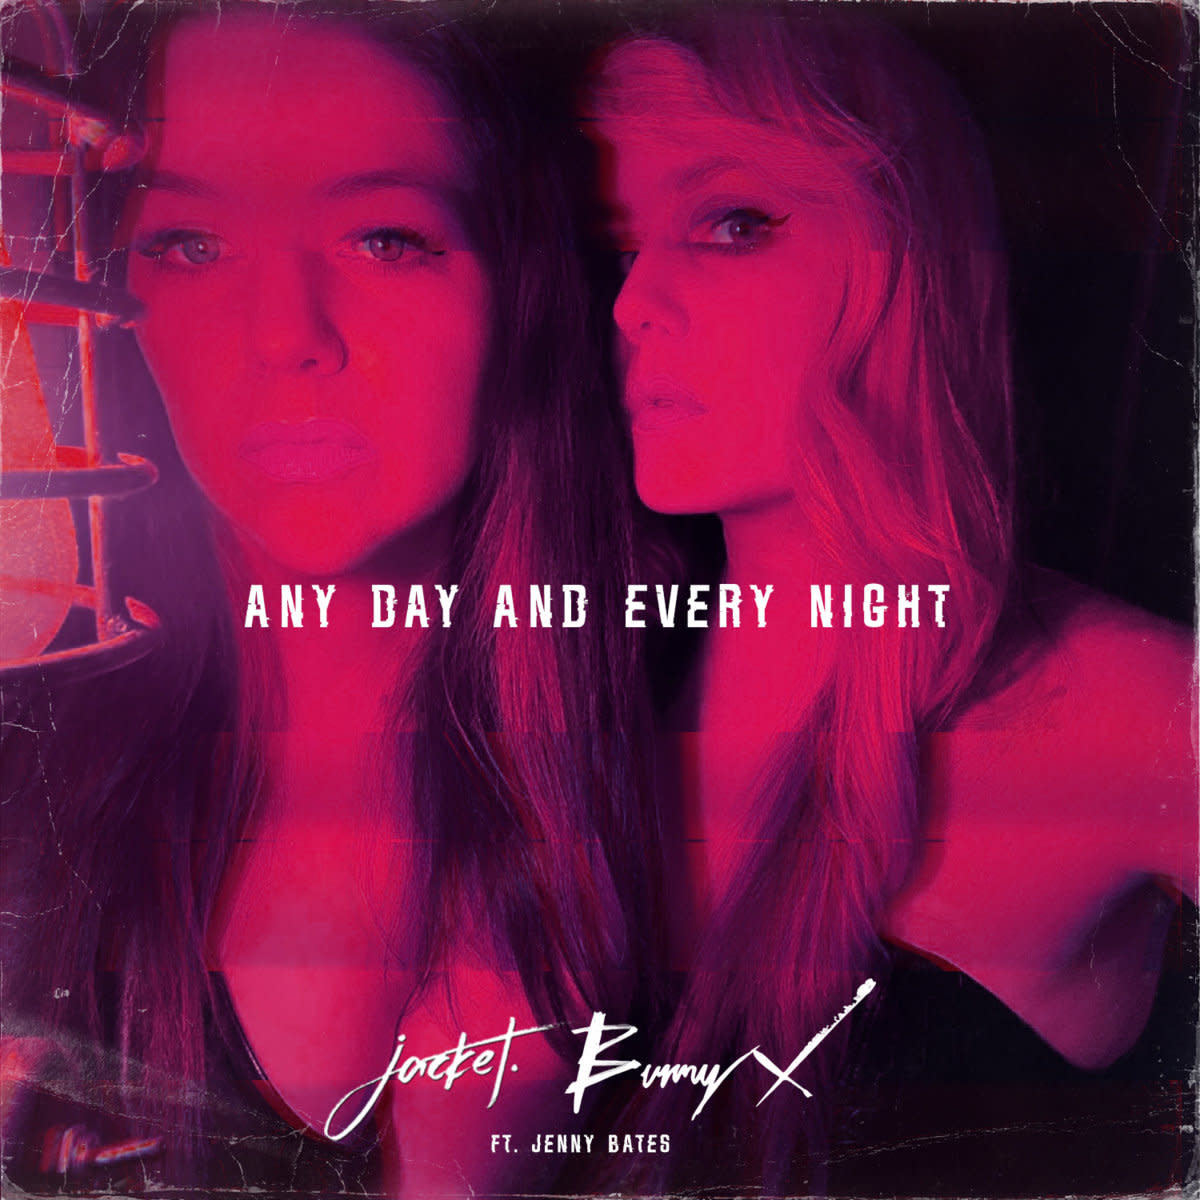 Synth Single Review: “Any Day and Every Night’’ by Bunny X, jacket. & Jenny Bates